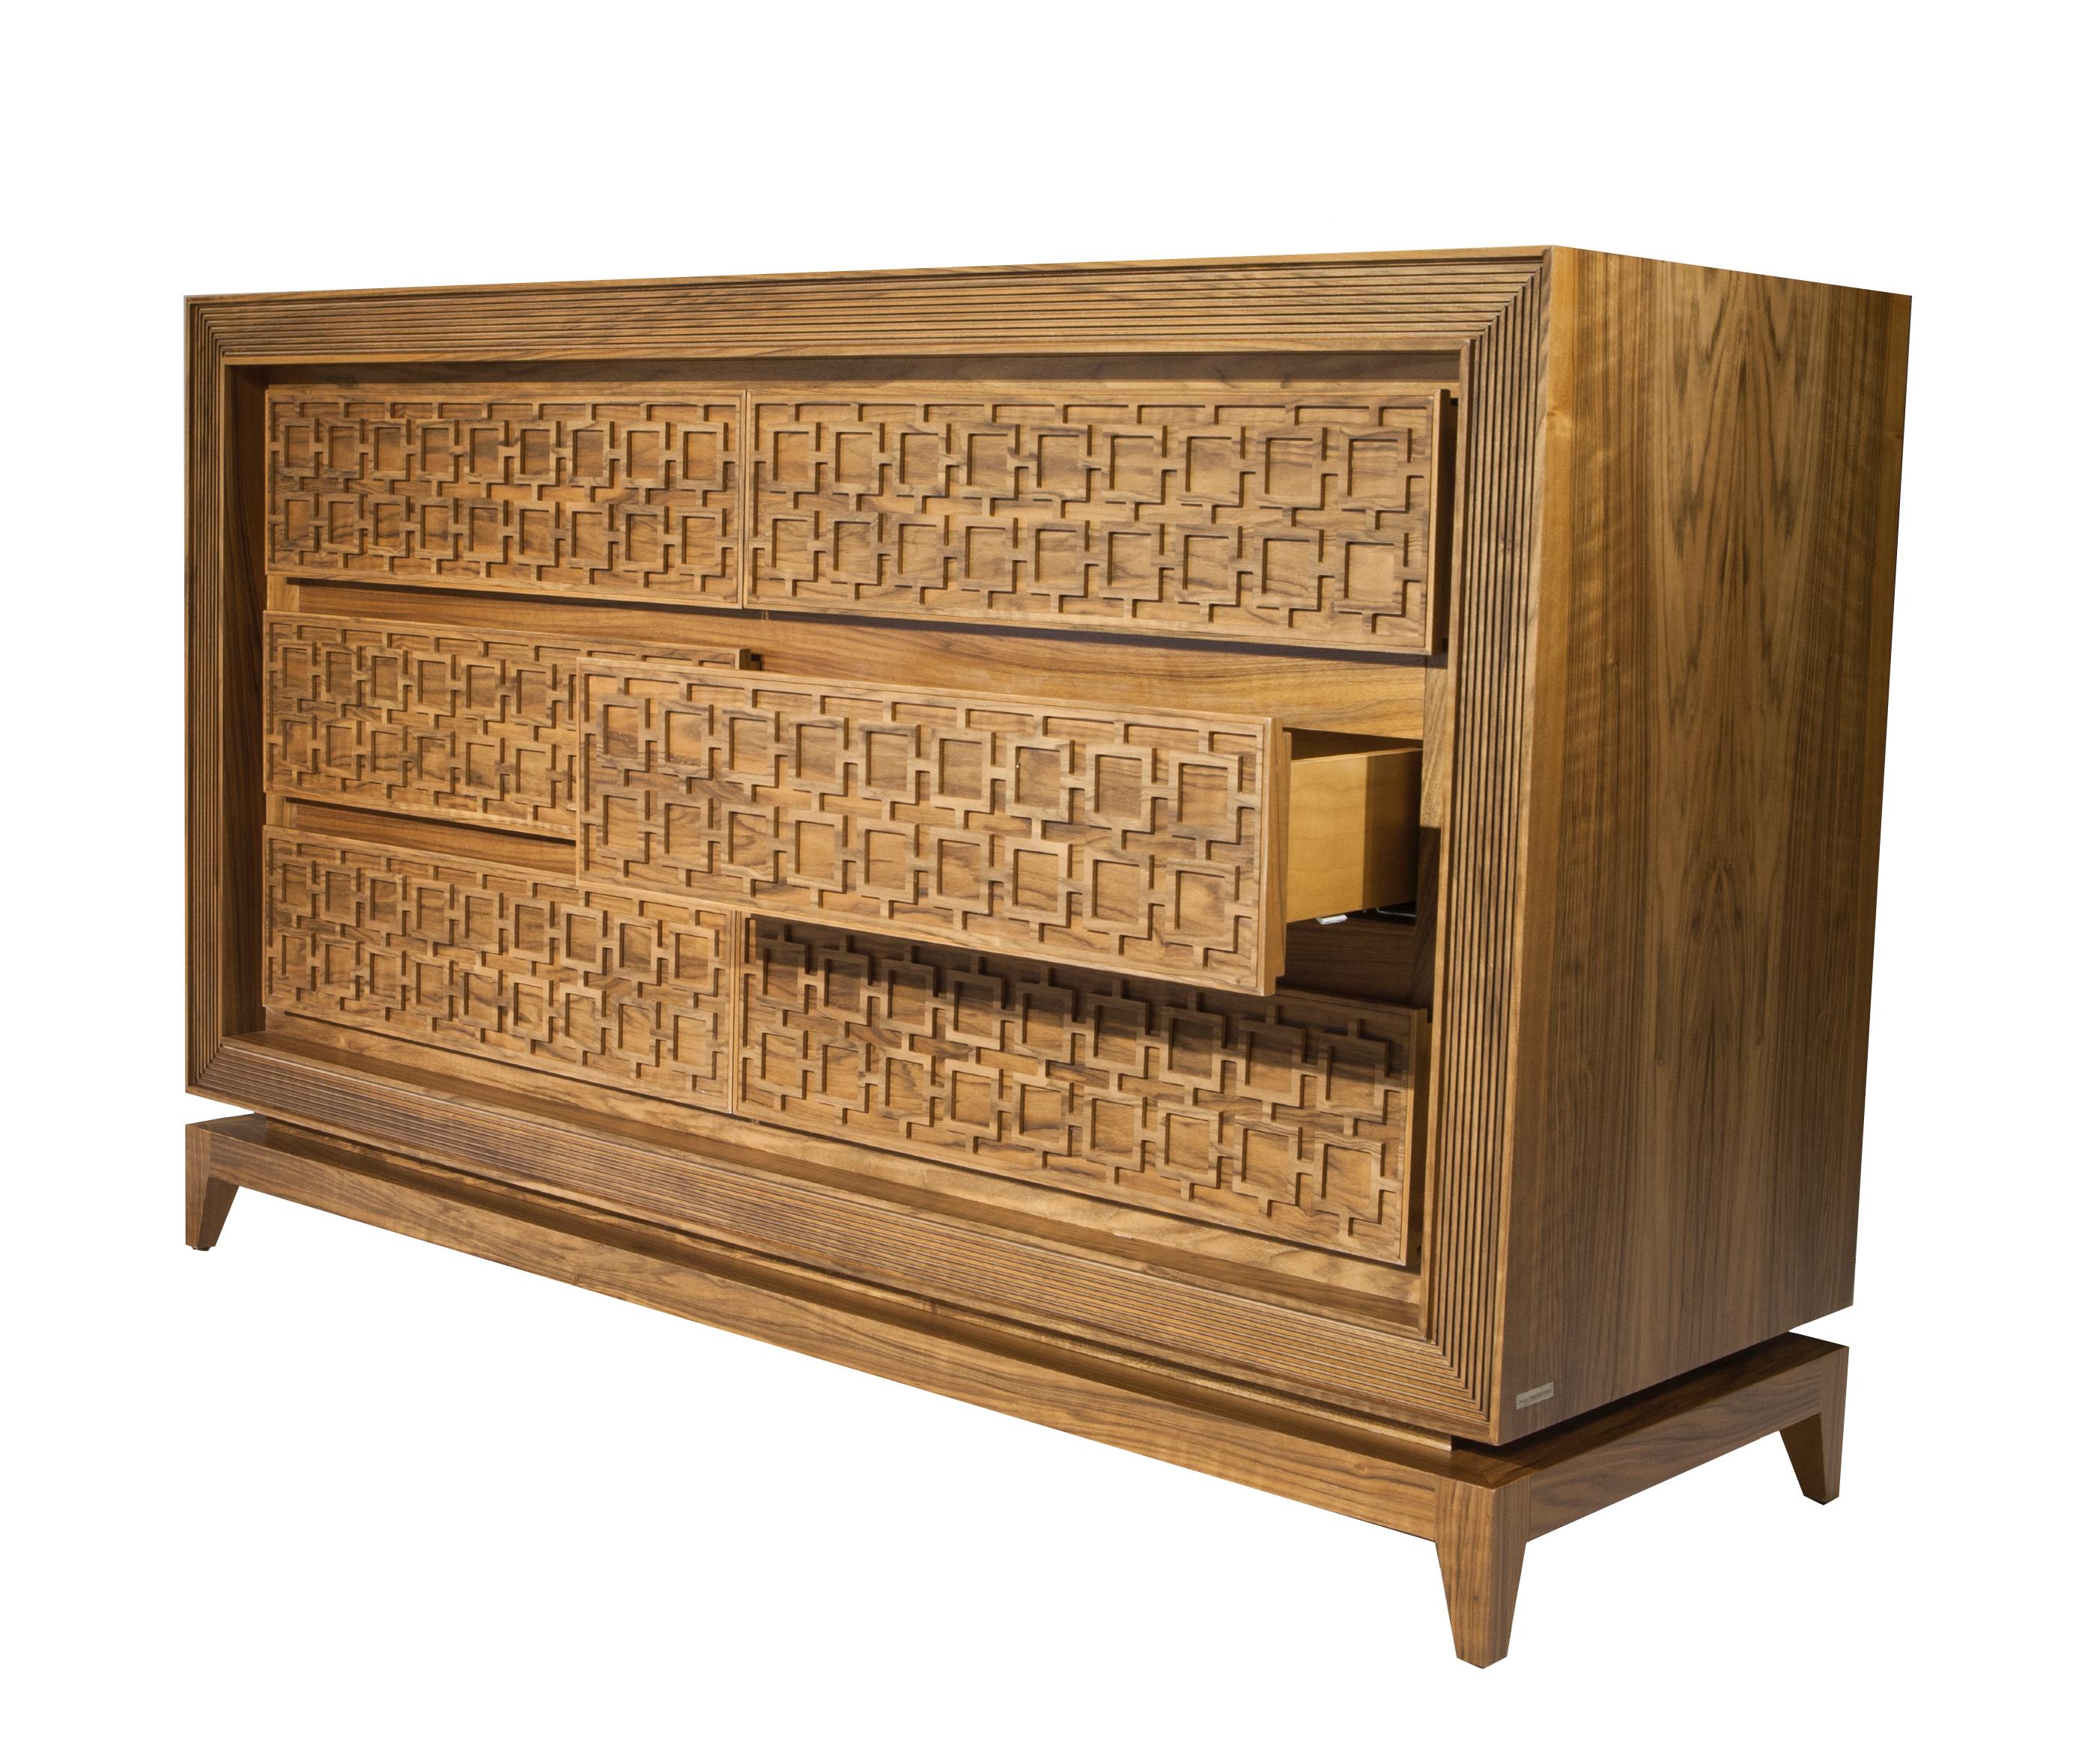 Grand in scale and beauty, the Harem dresser is a nod to chinoiserie motifs with intricate facade detailing and a tapered solid wood base.